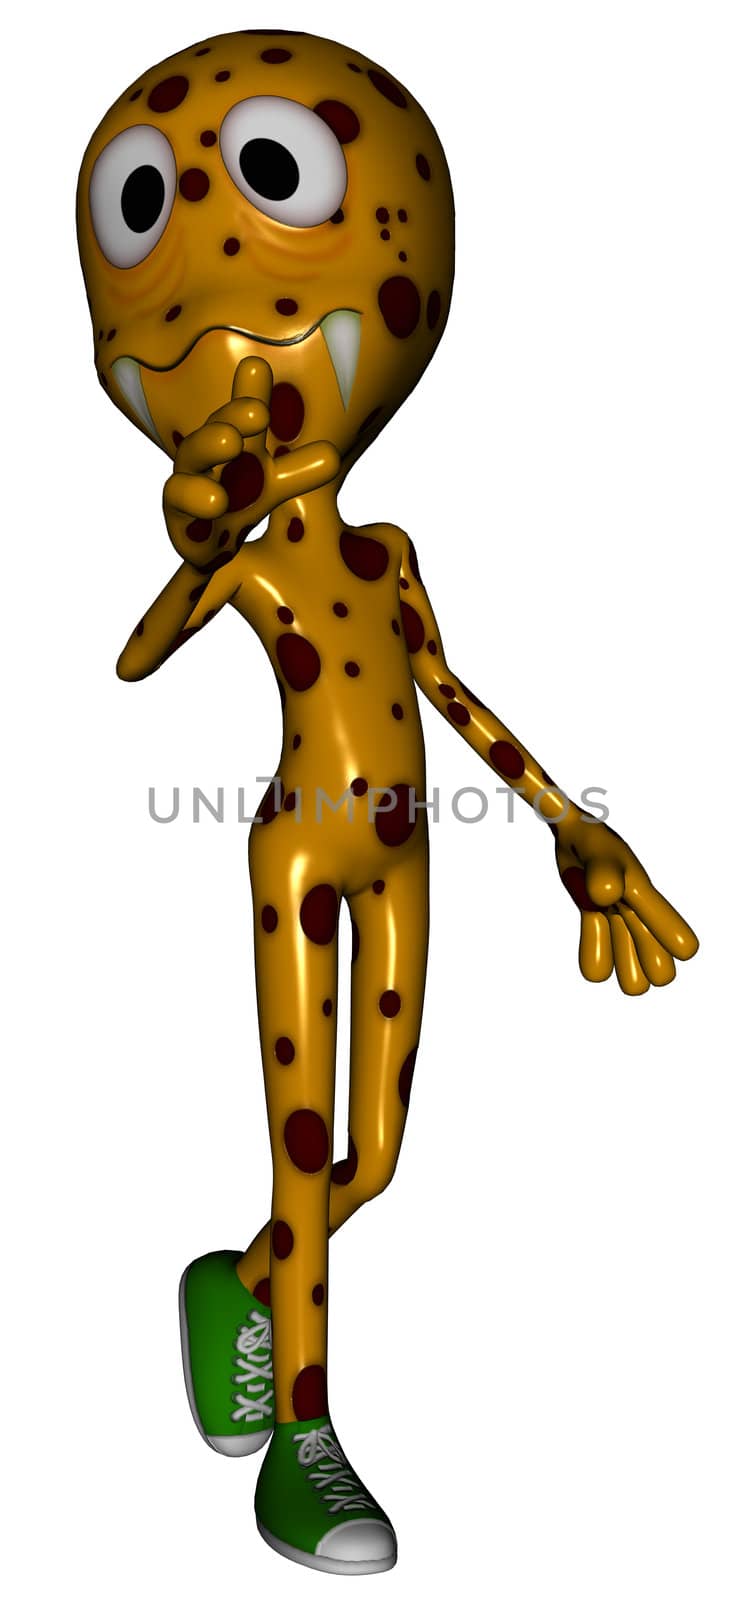 3D rendered cartoon Michael chameleon figure on white background isolated